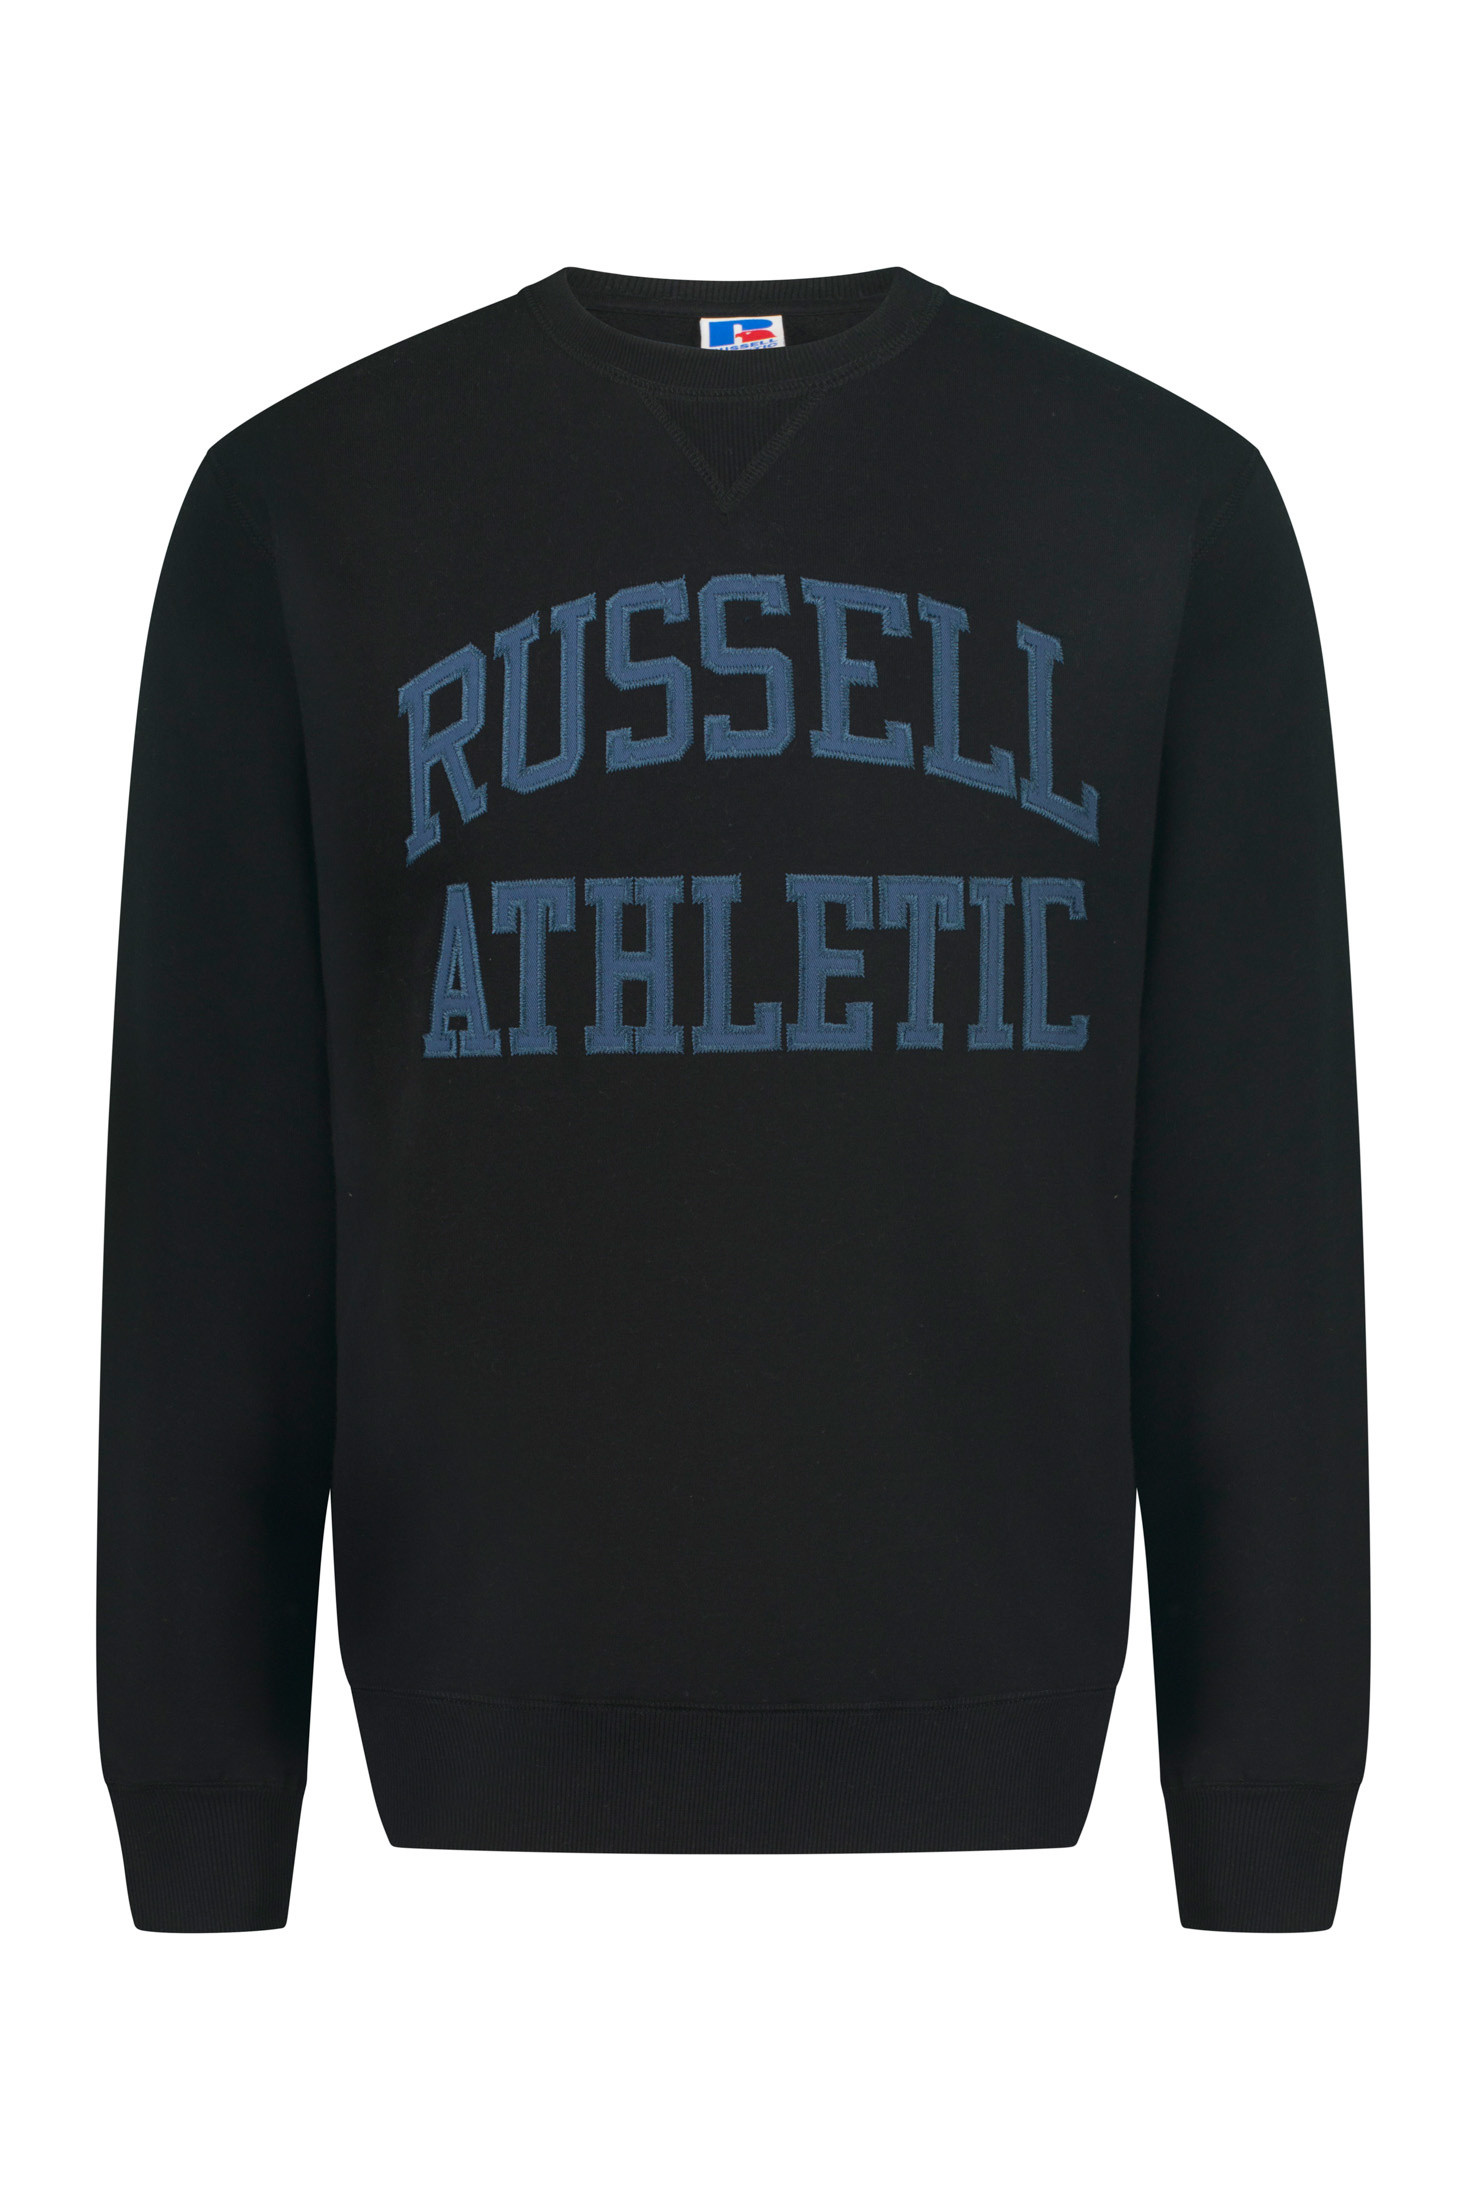 Russell Athletic - Sweatshirt with embroidery, Black, large image number 0